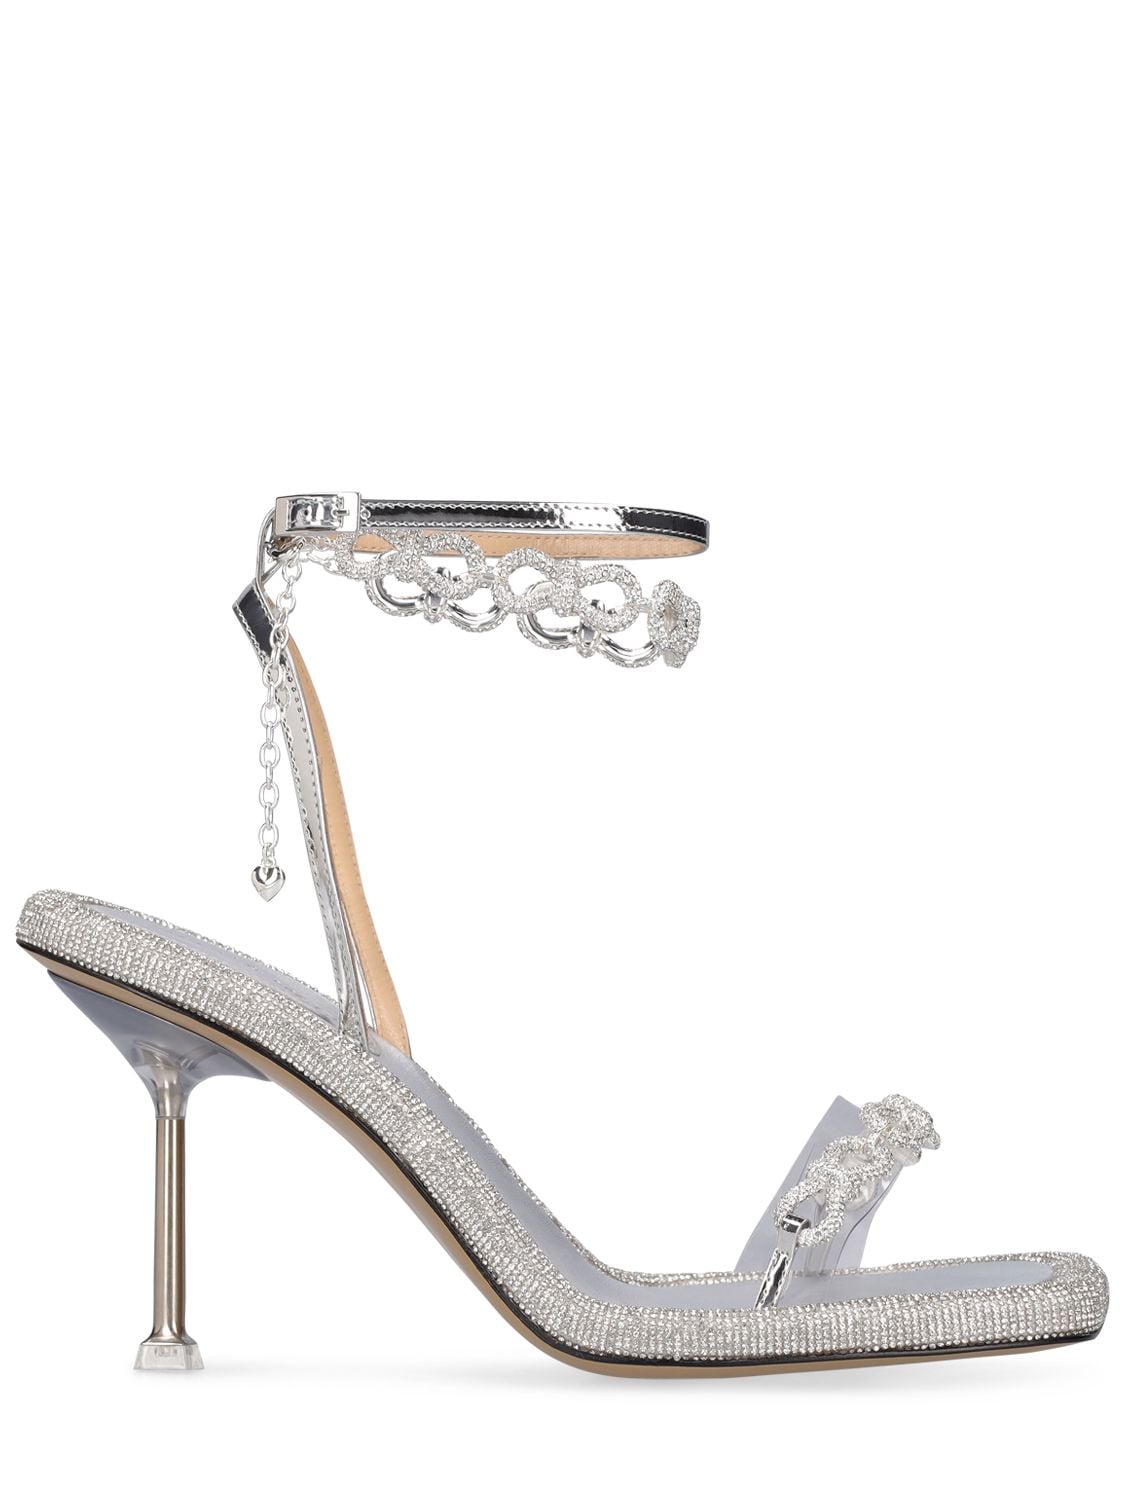 Mach & Mach 95mm Crystalized Bow Sandals In Silver